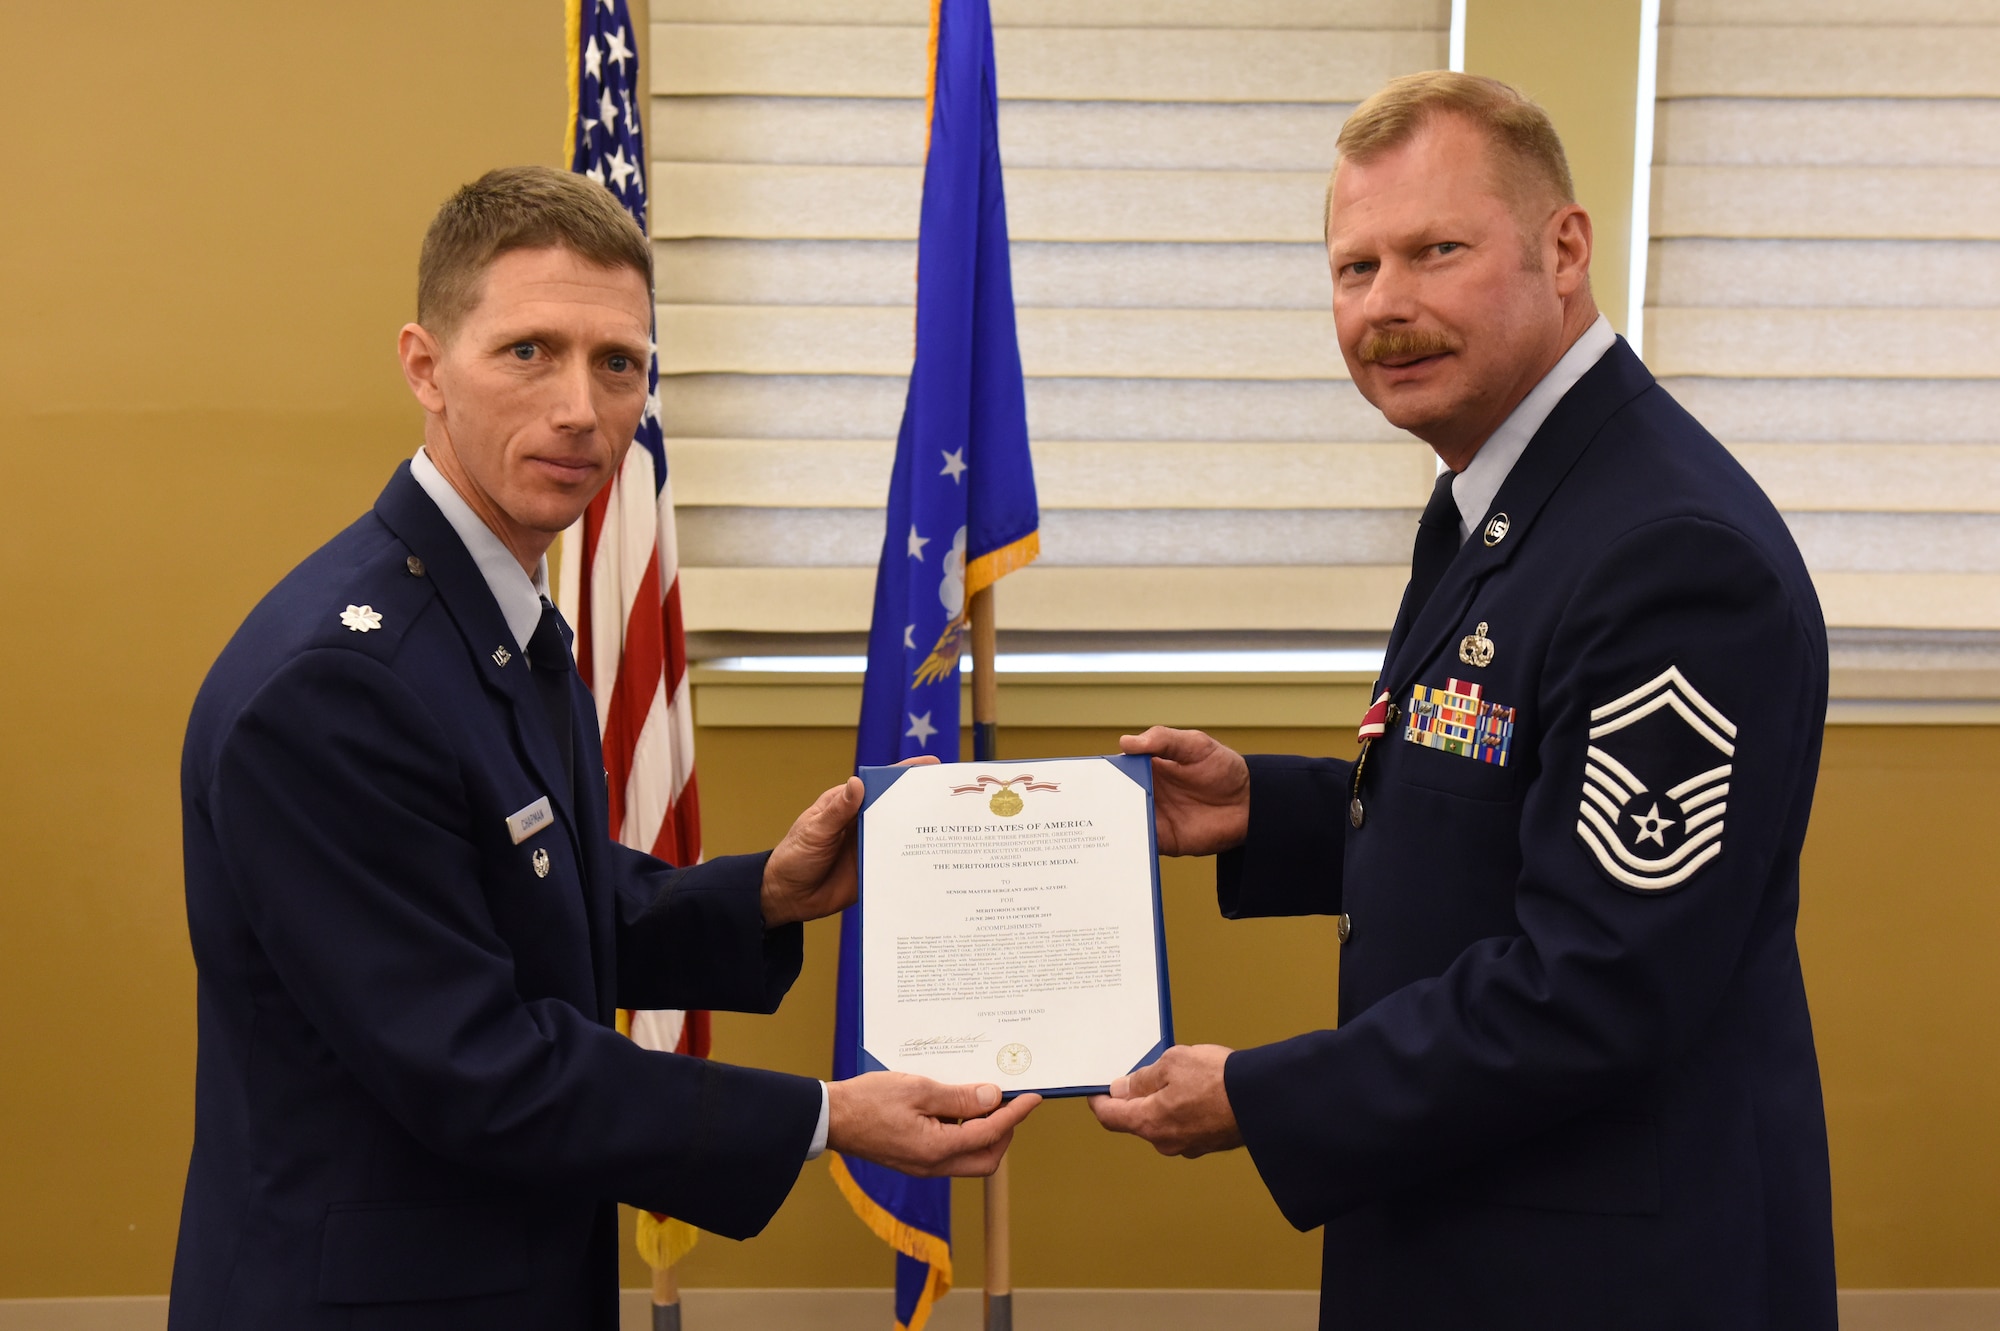 911th Maintenance Group Deputy Commander Lt. Col. William Chapman, left, presents Senior Master Sgt. John A. Szydel with a meritorious service medal citation during a retirement ceremony at the Pittsburgh International Airport Air Reserve Station, Pennsylvania, Oct. 5, 2019.